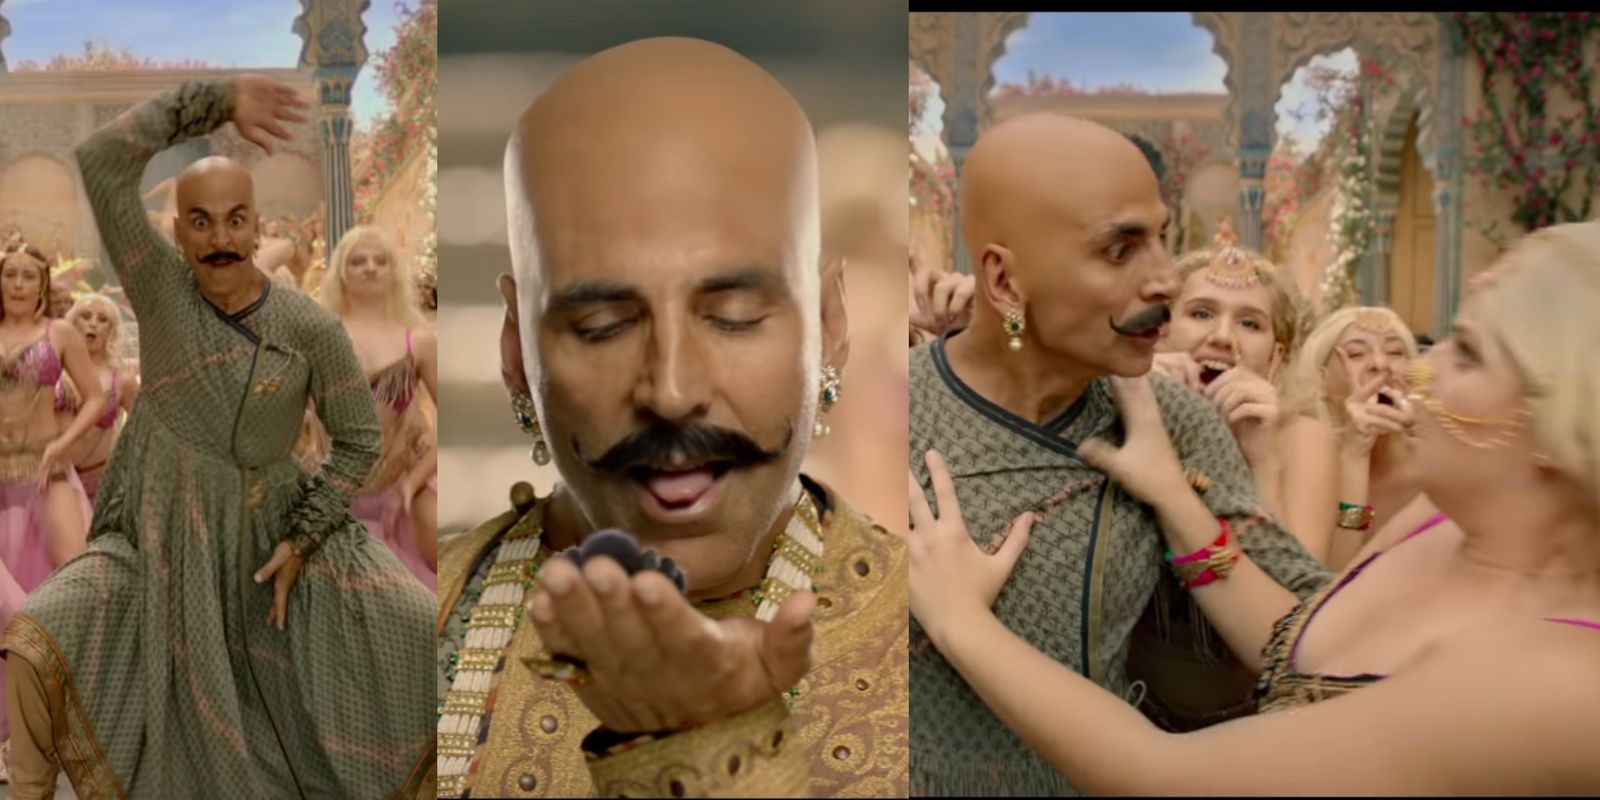 Housefull 4 Song Bala: Akshay Kumar Goes Crazy To The Extent Of Licking Tarantulas And Trying To Forcibly Kiss!